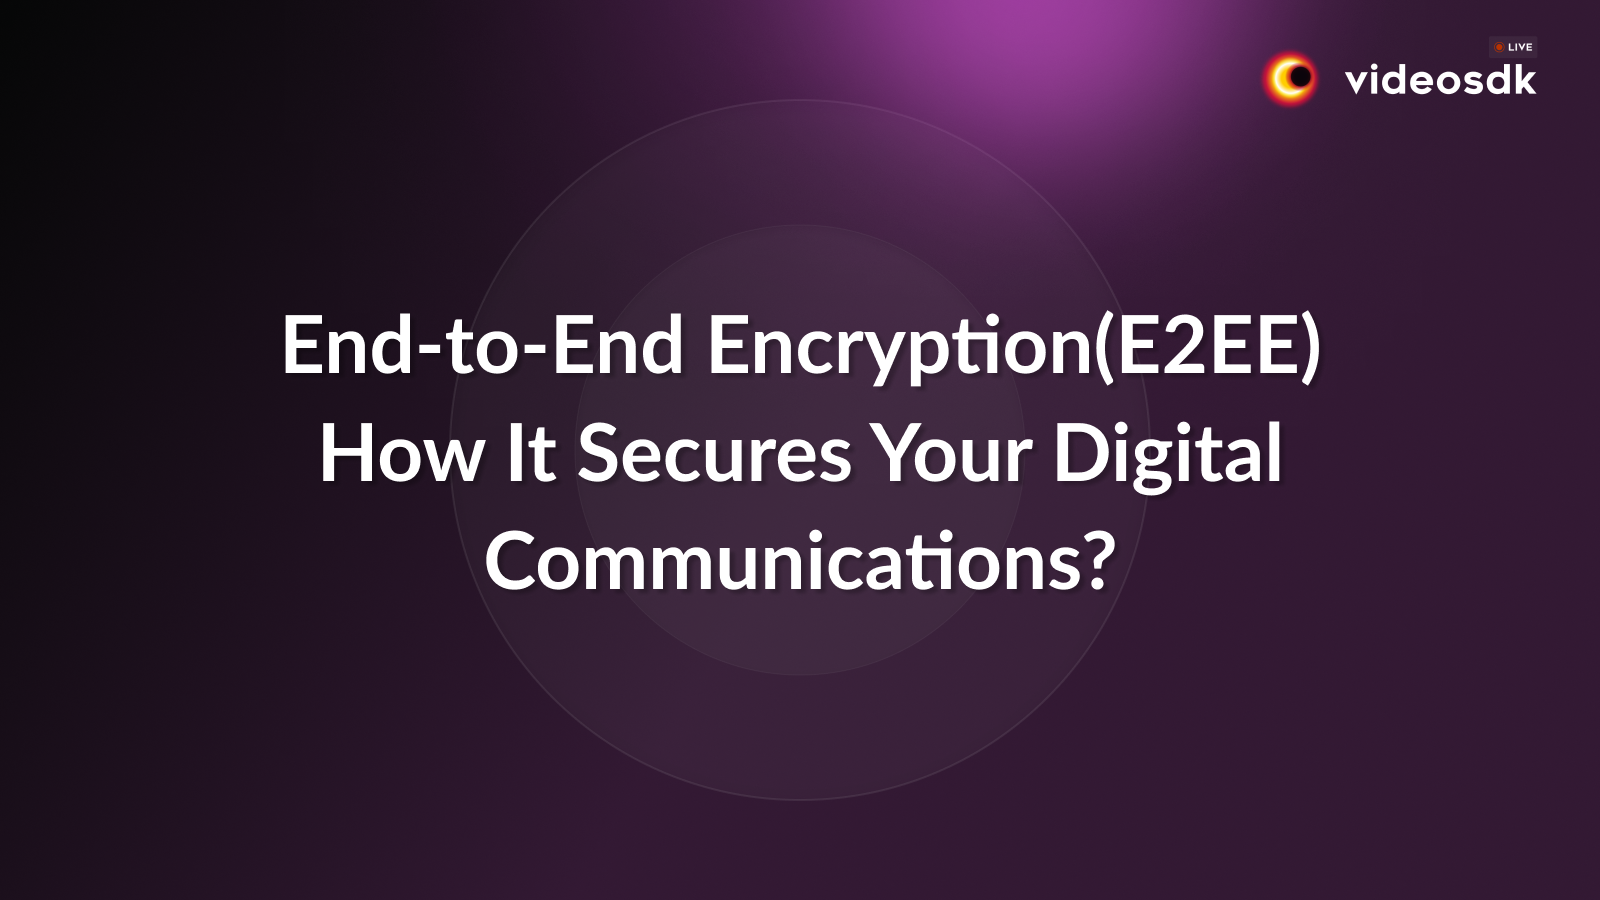 End-to-End Encryption(E2EE): How It Secures Your Digital Communications?